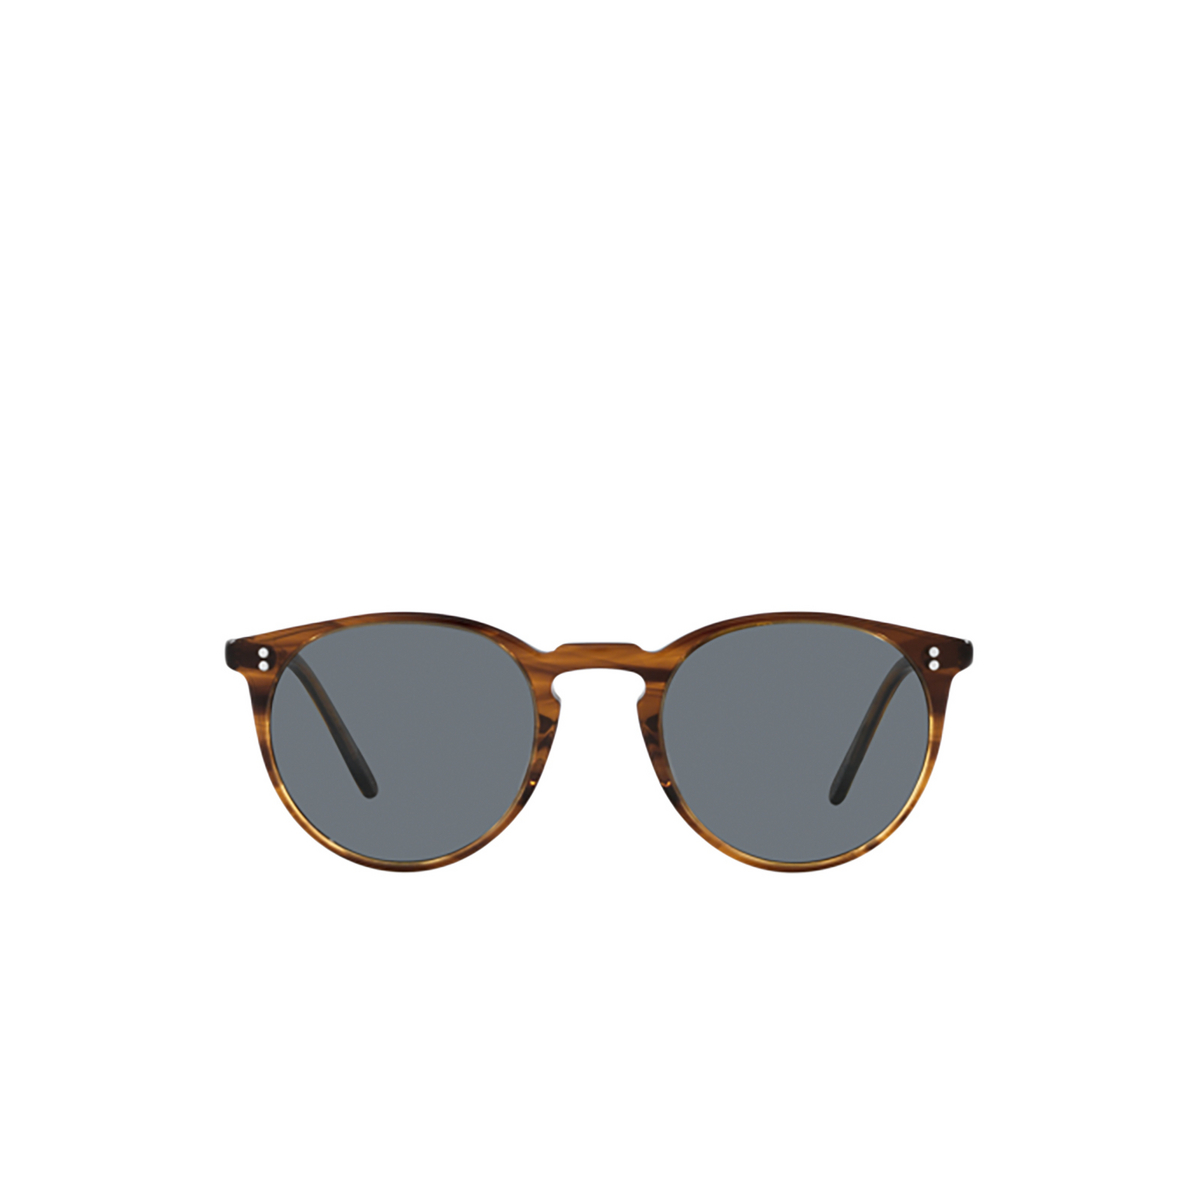 Oliver Peoples O'MALLEY Sunglasses 1724R8 Tuscany Tortoise - front view